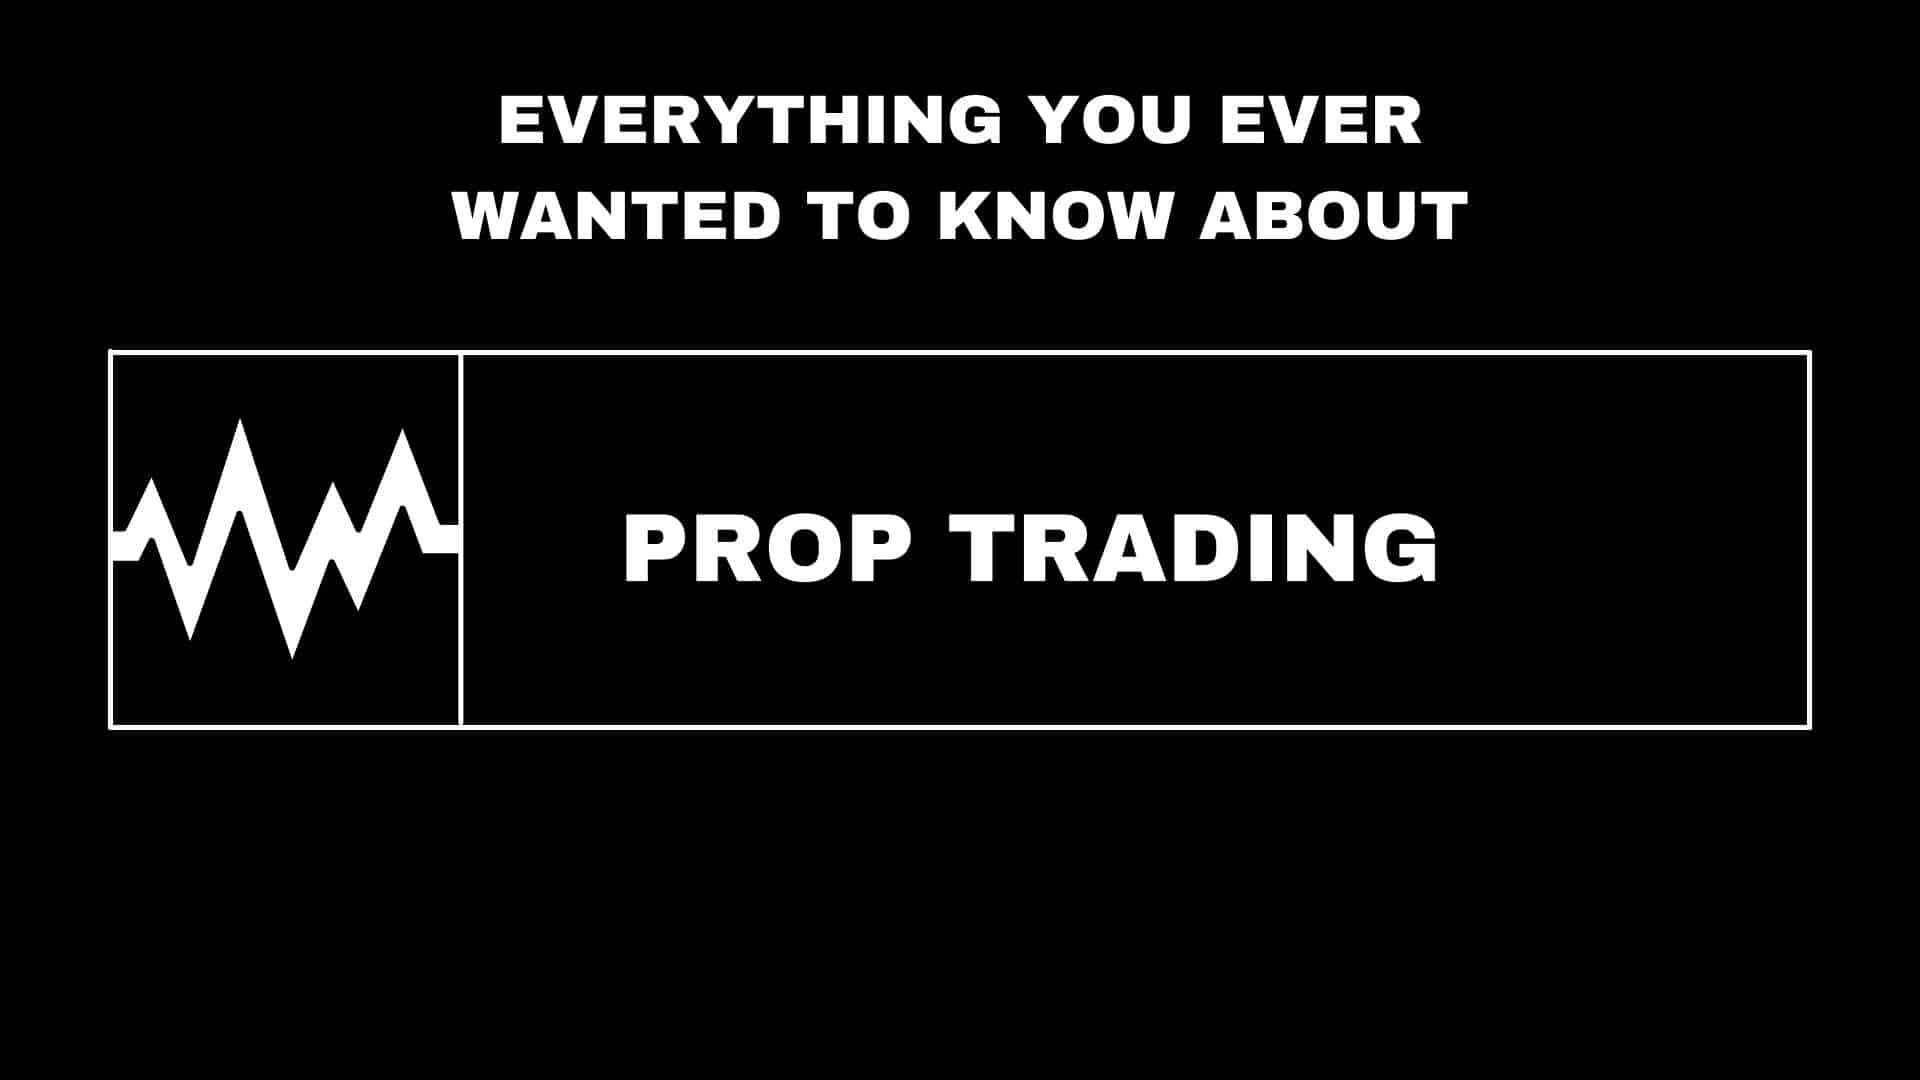 All About Prop Trading